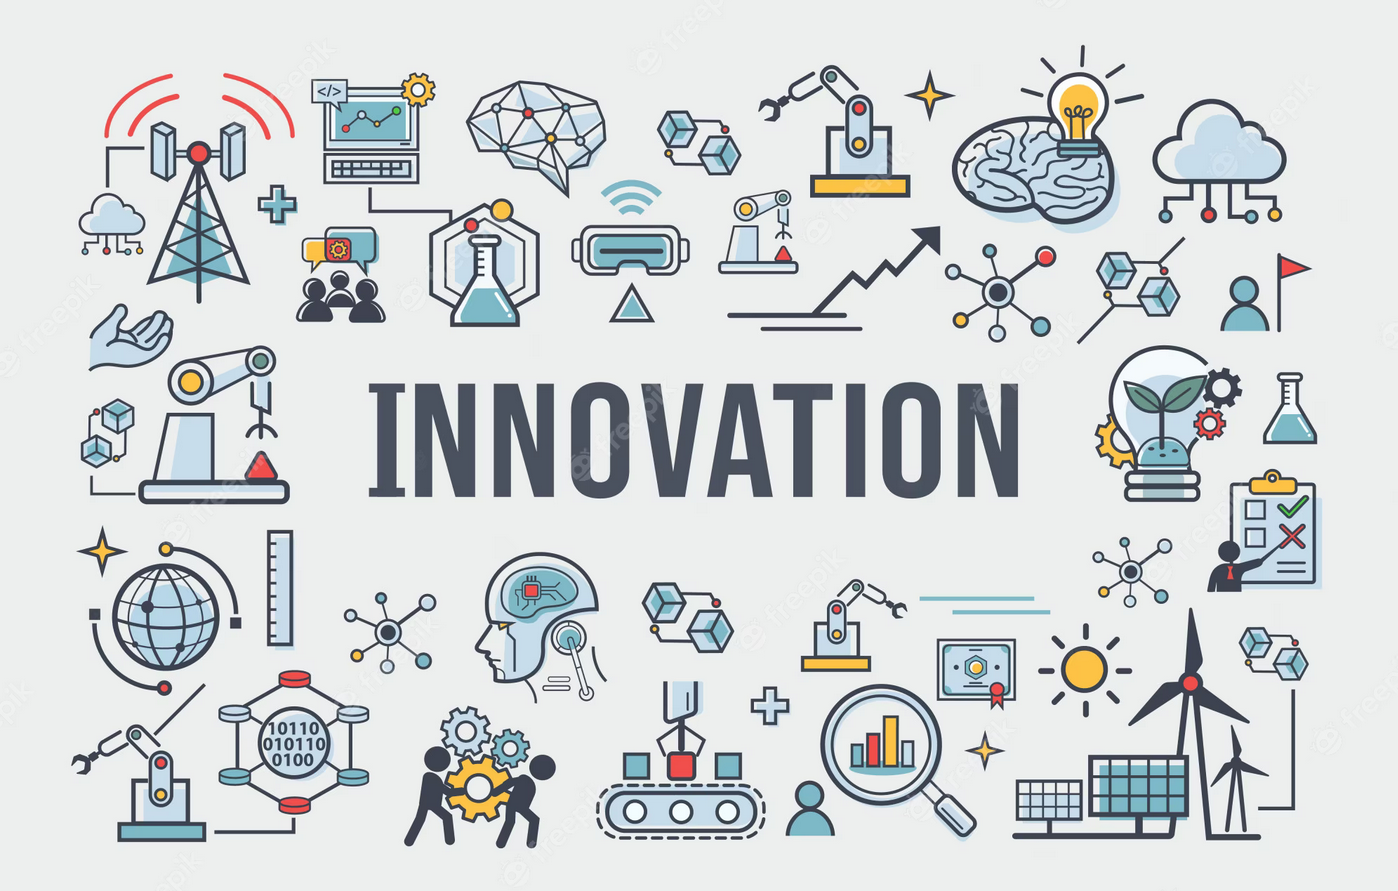 Patents with Simultaneous Innovations: The Patentability Requirements and the Direction of Innovation